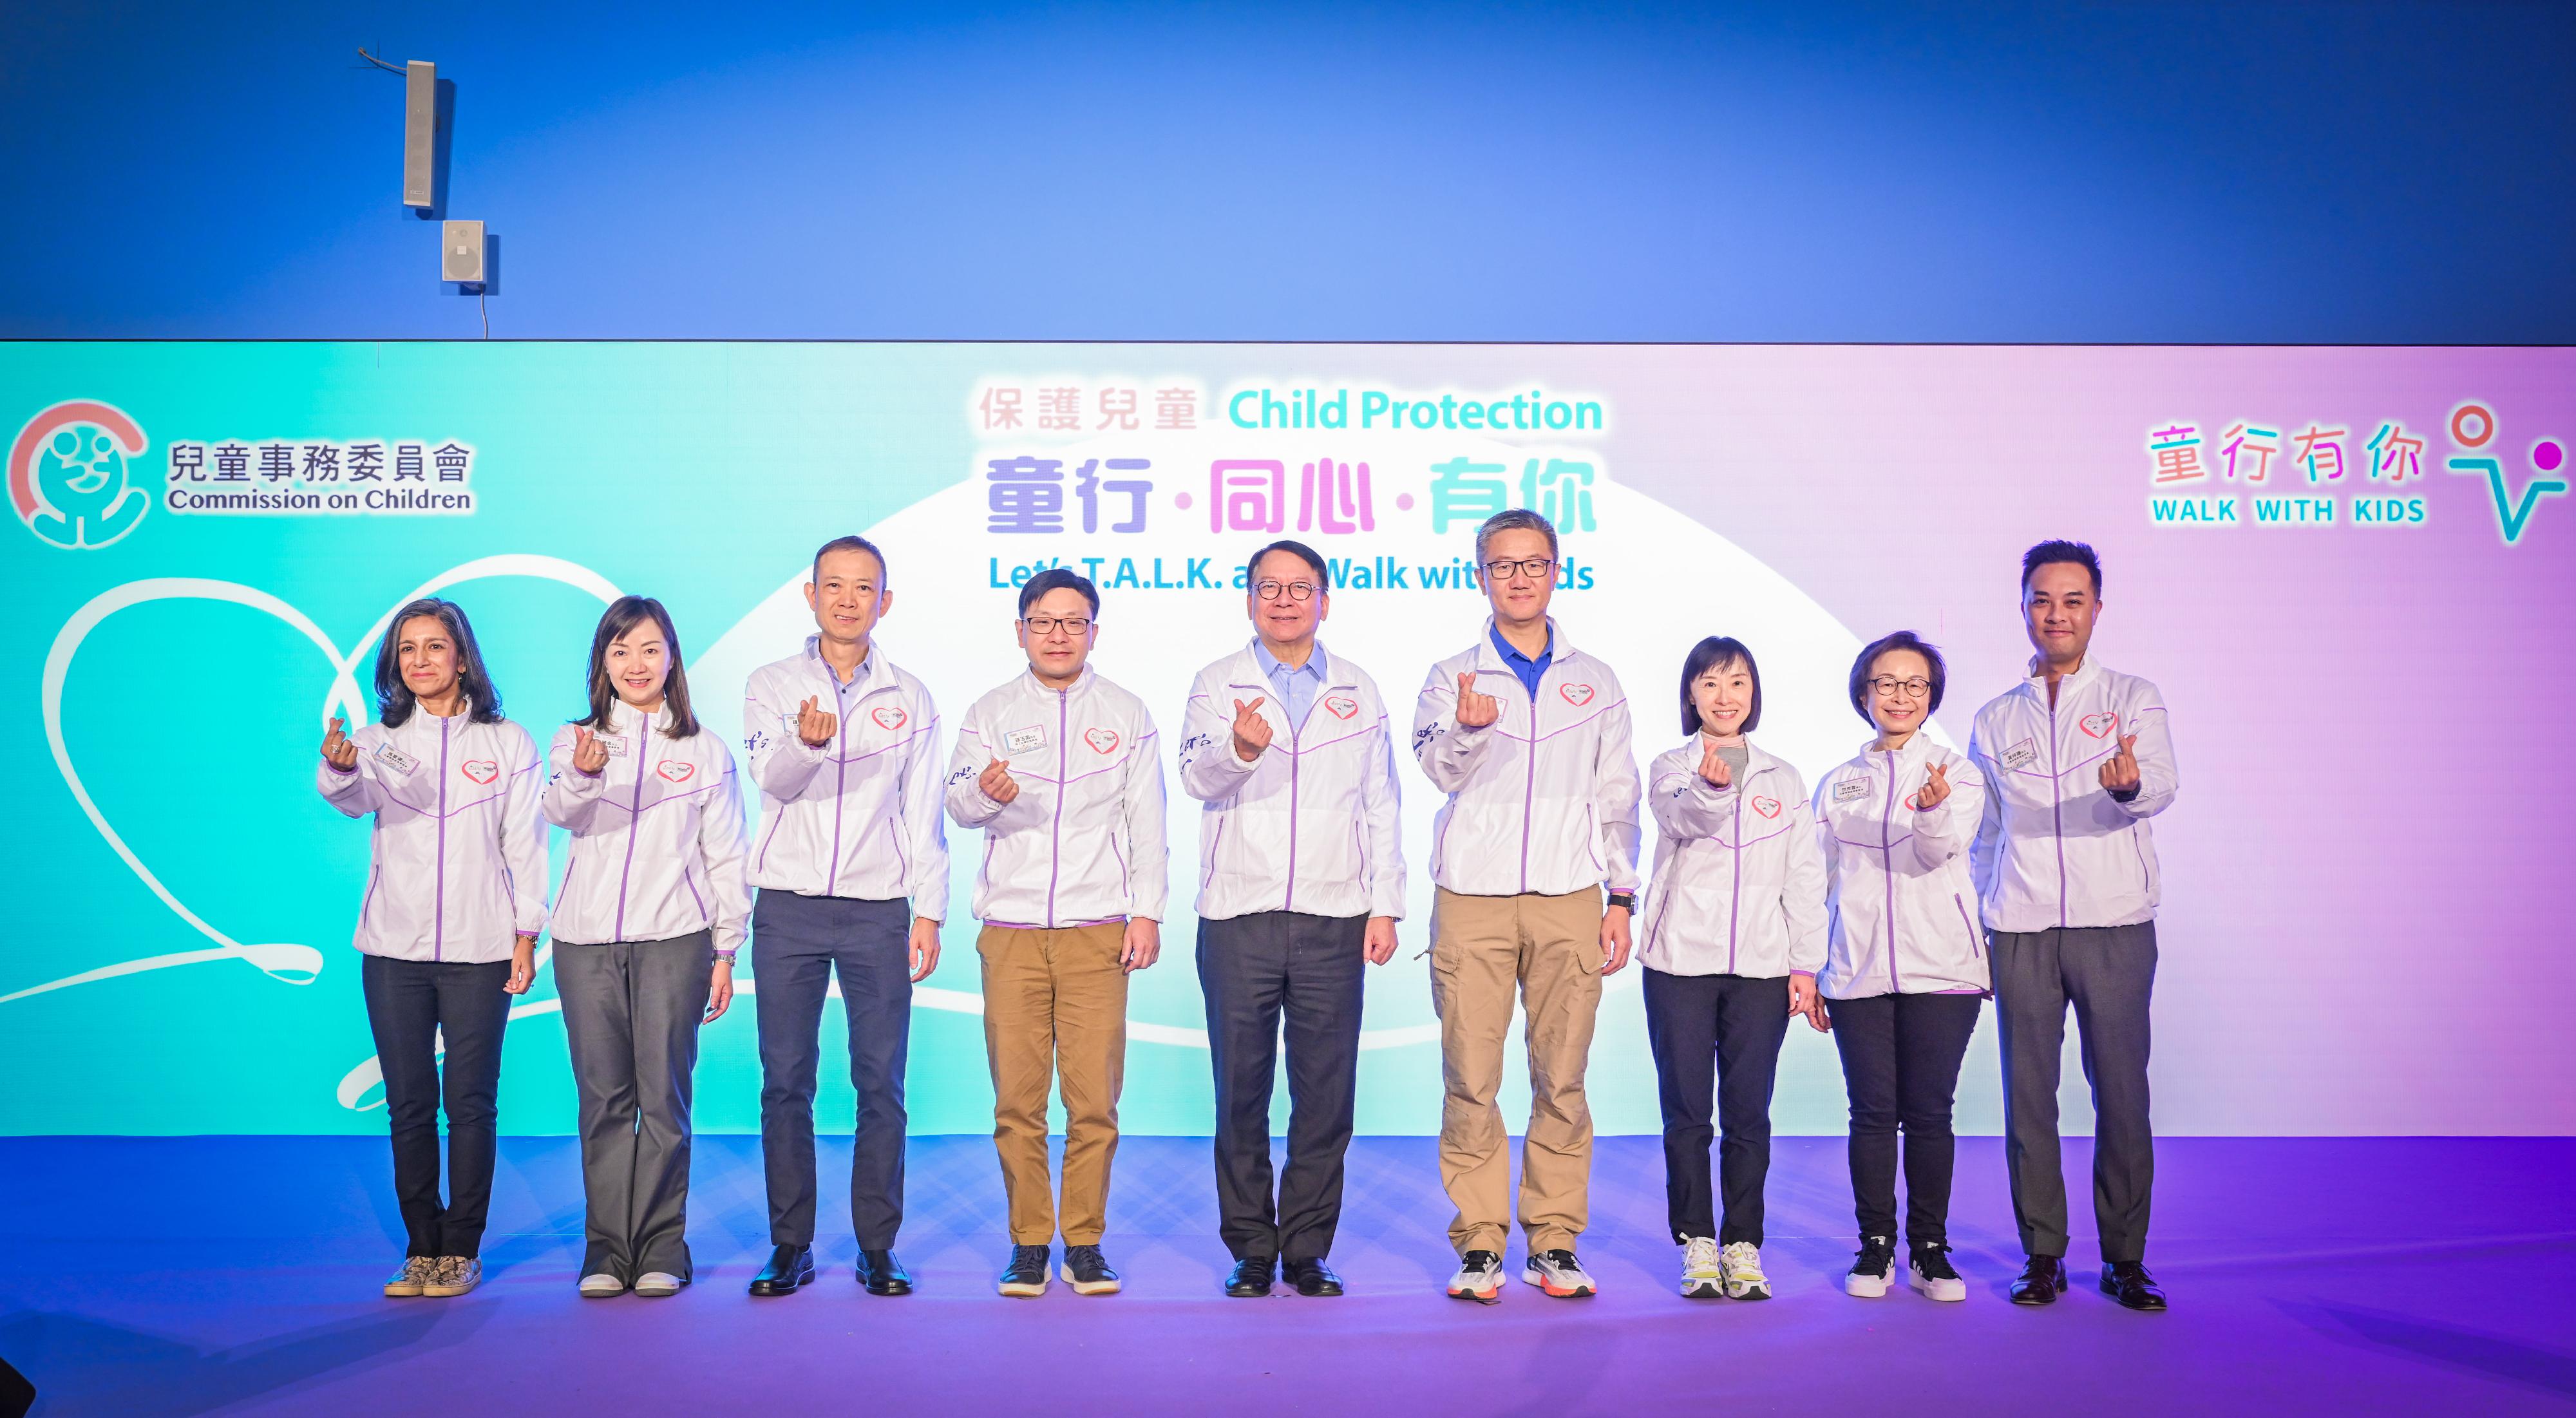 The Chief Secretary for Administration and Chairperson of the Commission on Children, Mr Chan Kwok-ki, today (November 18) officiated at the "Let's T.A.L.K. and Walk with Kids" Child Protection Campaign Award Presentation Ceremony 2023. Photo shows (from left) the Convenor of the Working Group on Children with Specific Needs, Ms Shalini Mahtani; the Convenor of the Working Group on Children Protection, Ms Kathy Chung; the Consultant Community Medicine (Family and Student Health) of the Department of Health, Dr Thomas Chung; the Secretary for Labour and Welfare, Mr Chris Sun; Mr Chan; the Commissioner of Police, Mr Siu Chak-yee; the Director of Social Welfare, Miss Charmaine Lee; the Convenor of the Working Group on Research and Development, Dr Sanly Kam; and the Convenor of the Working Group on Promotion of Children's Rights and Development, Public Education and Engagement, Mr Gary Wong, at the ceremony.